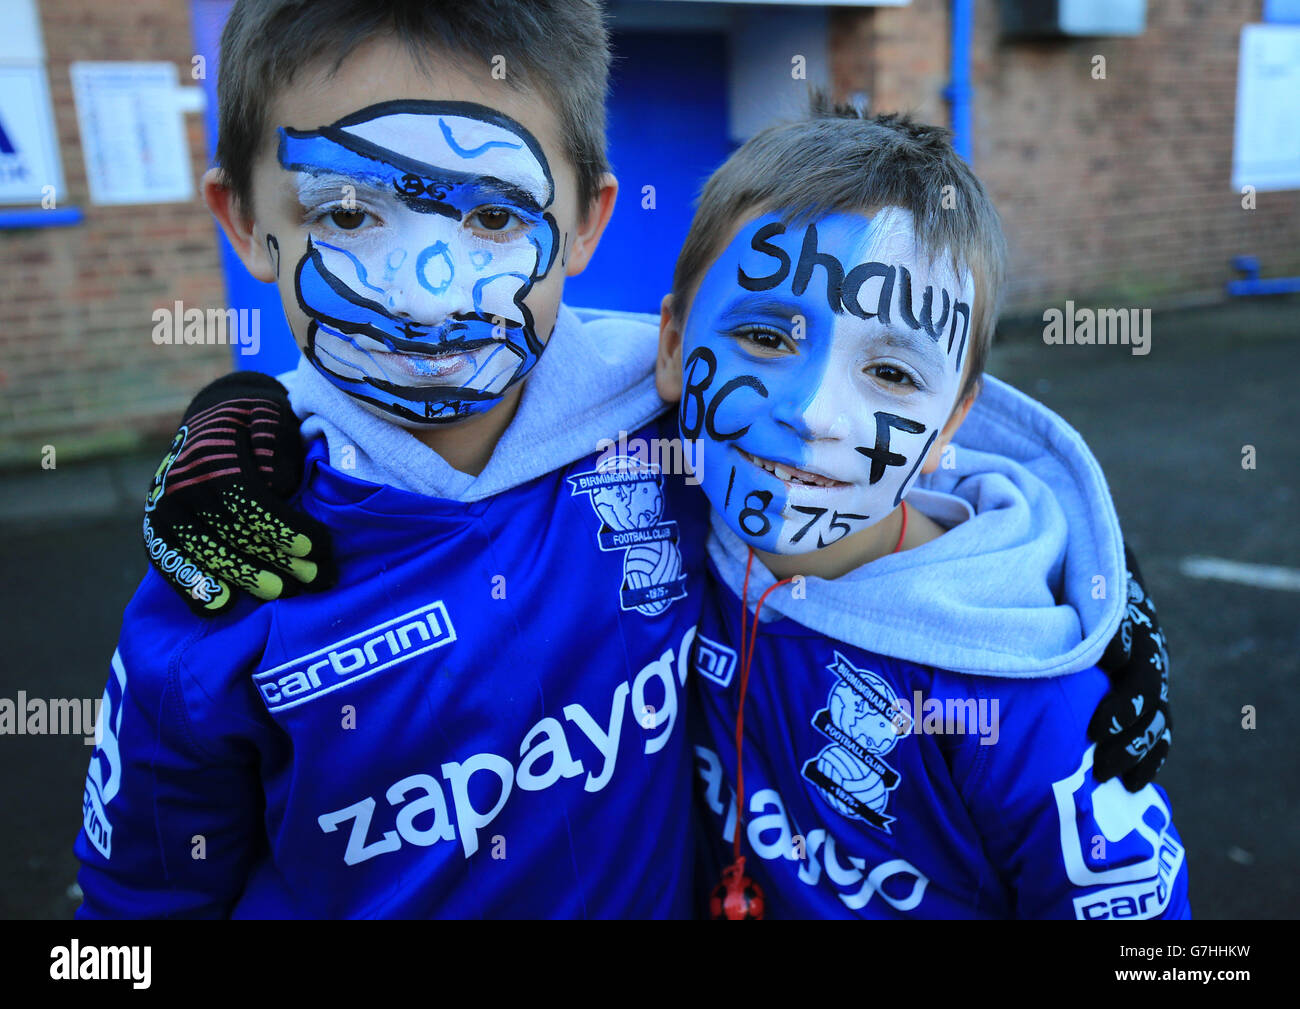 Birmingham City supporters Liam and Shawn Price after having their faces painted before the game against Reading. Stock Photo